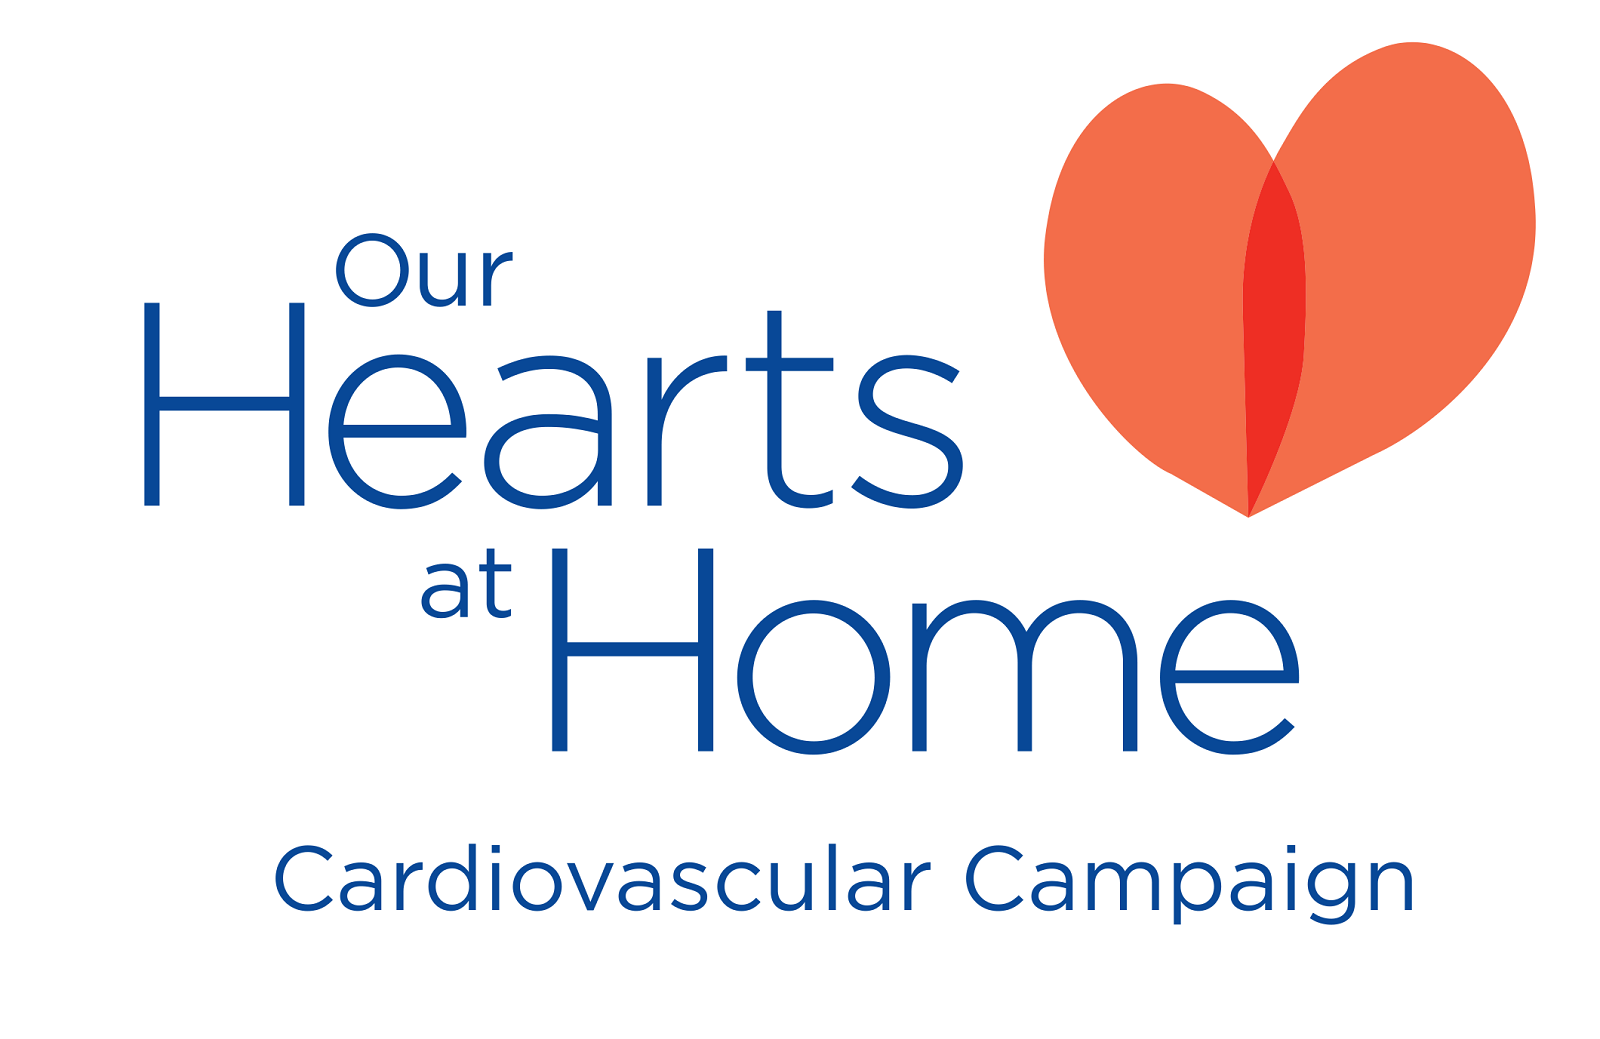 Our Hearts at Home Campaign